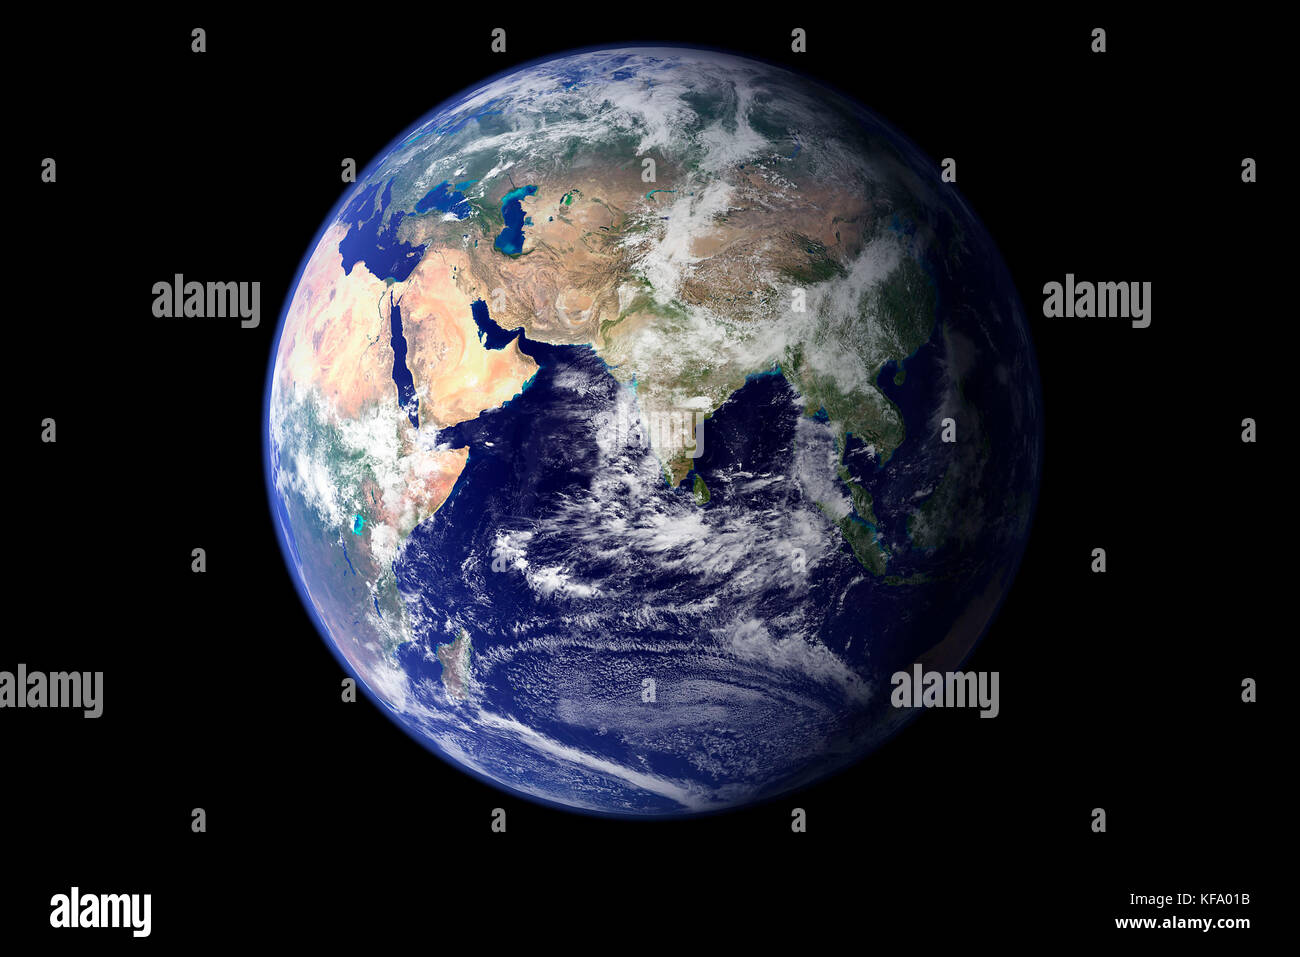 Earth from space Stock Photo